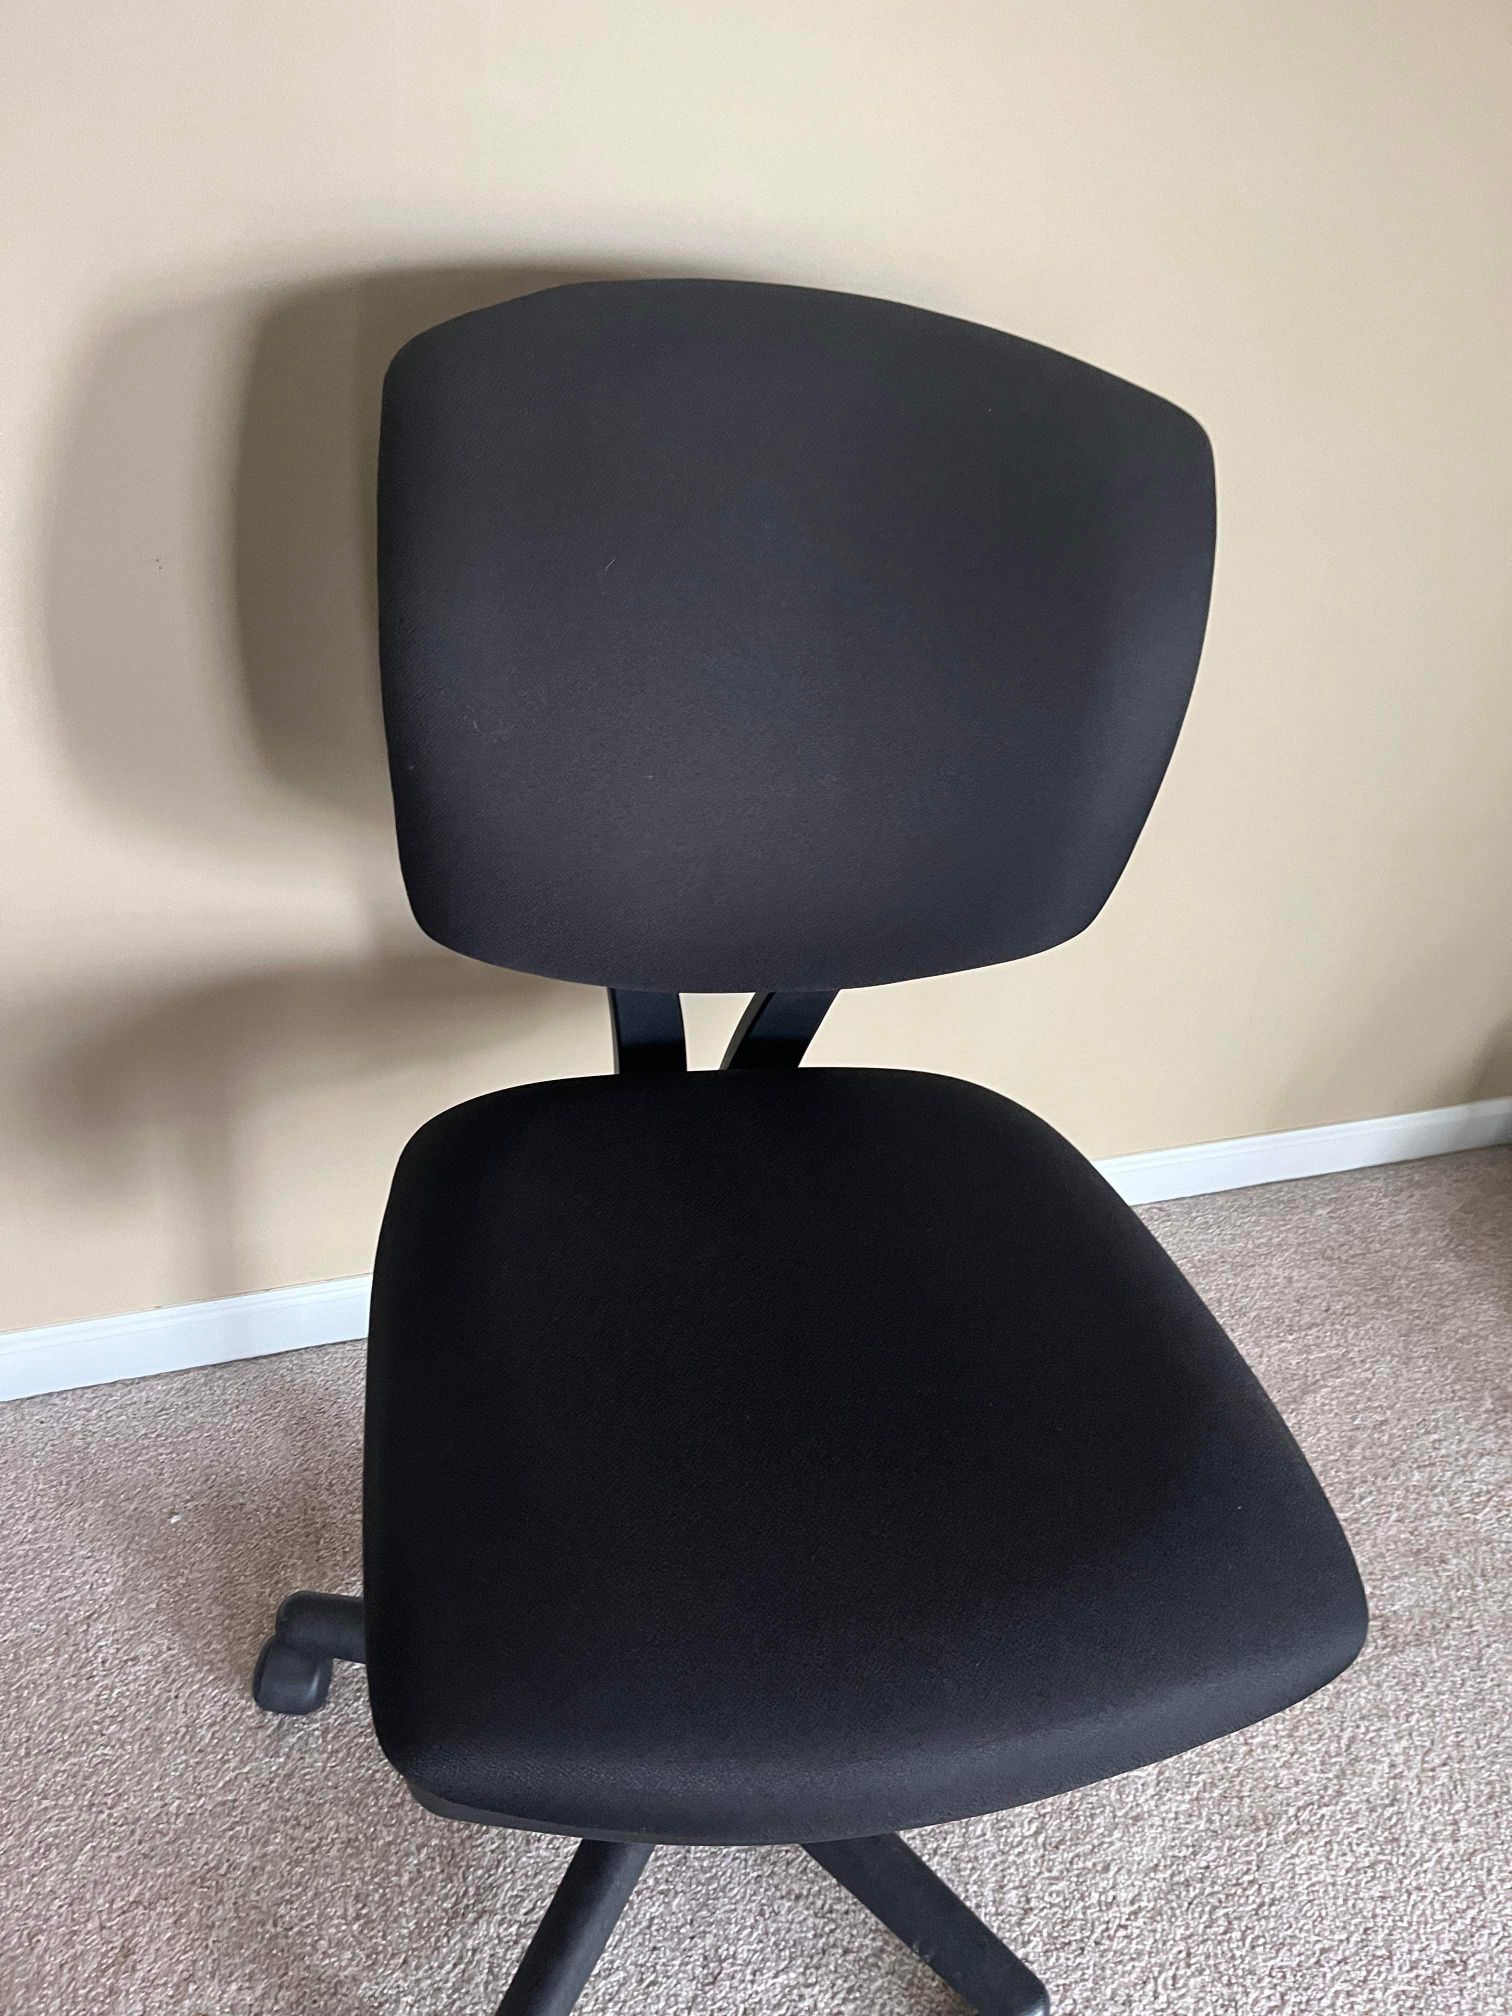 Office Chair Like New 